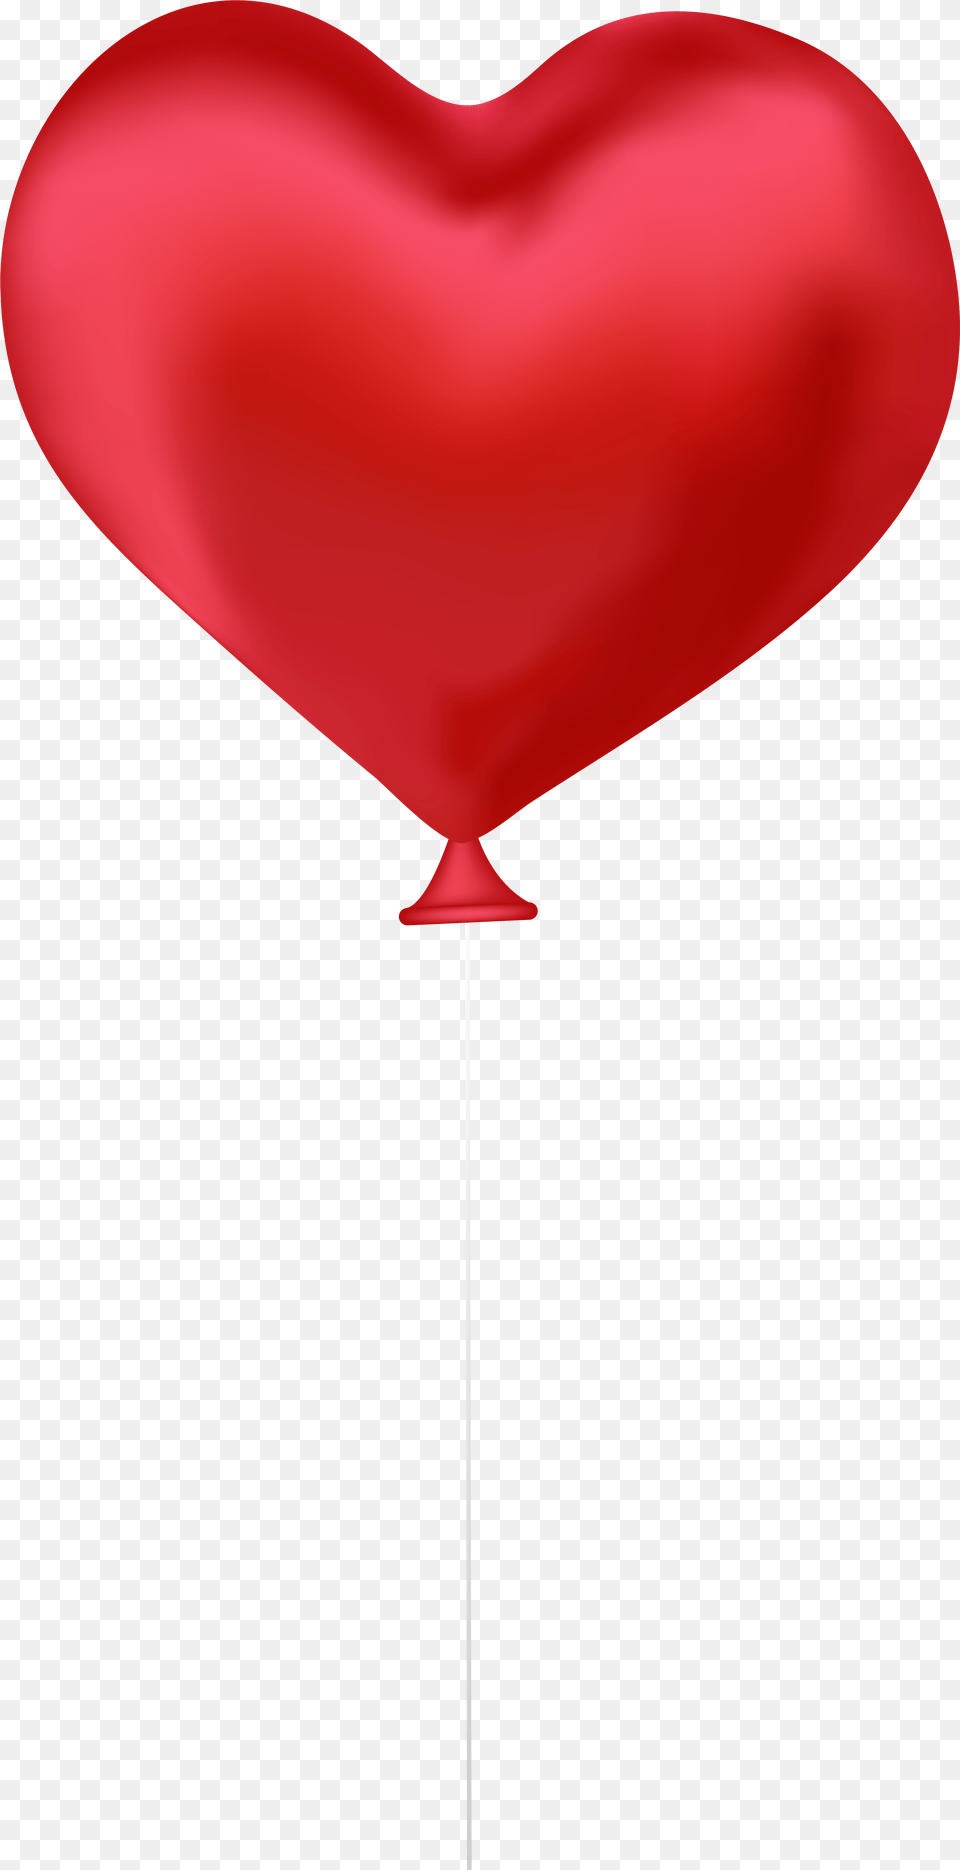 Red Heart Balloon Clip Art Image Transparent Red Heart Balloon Png